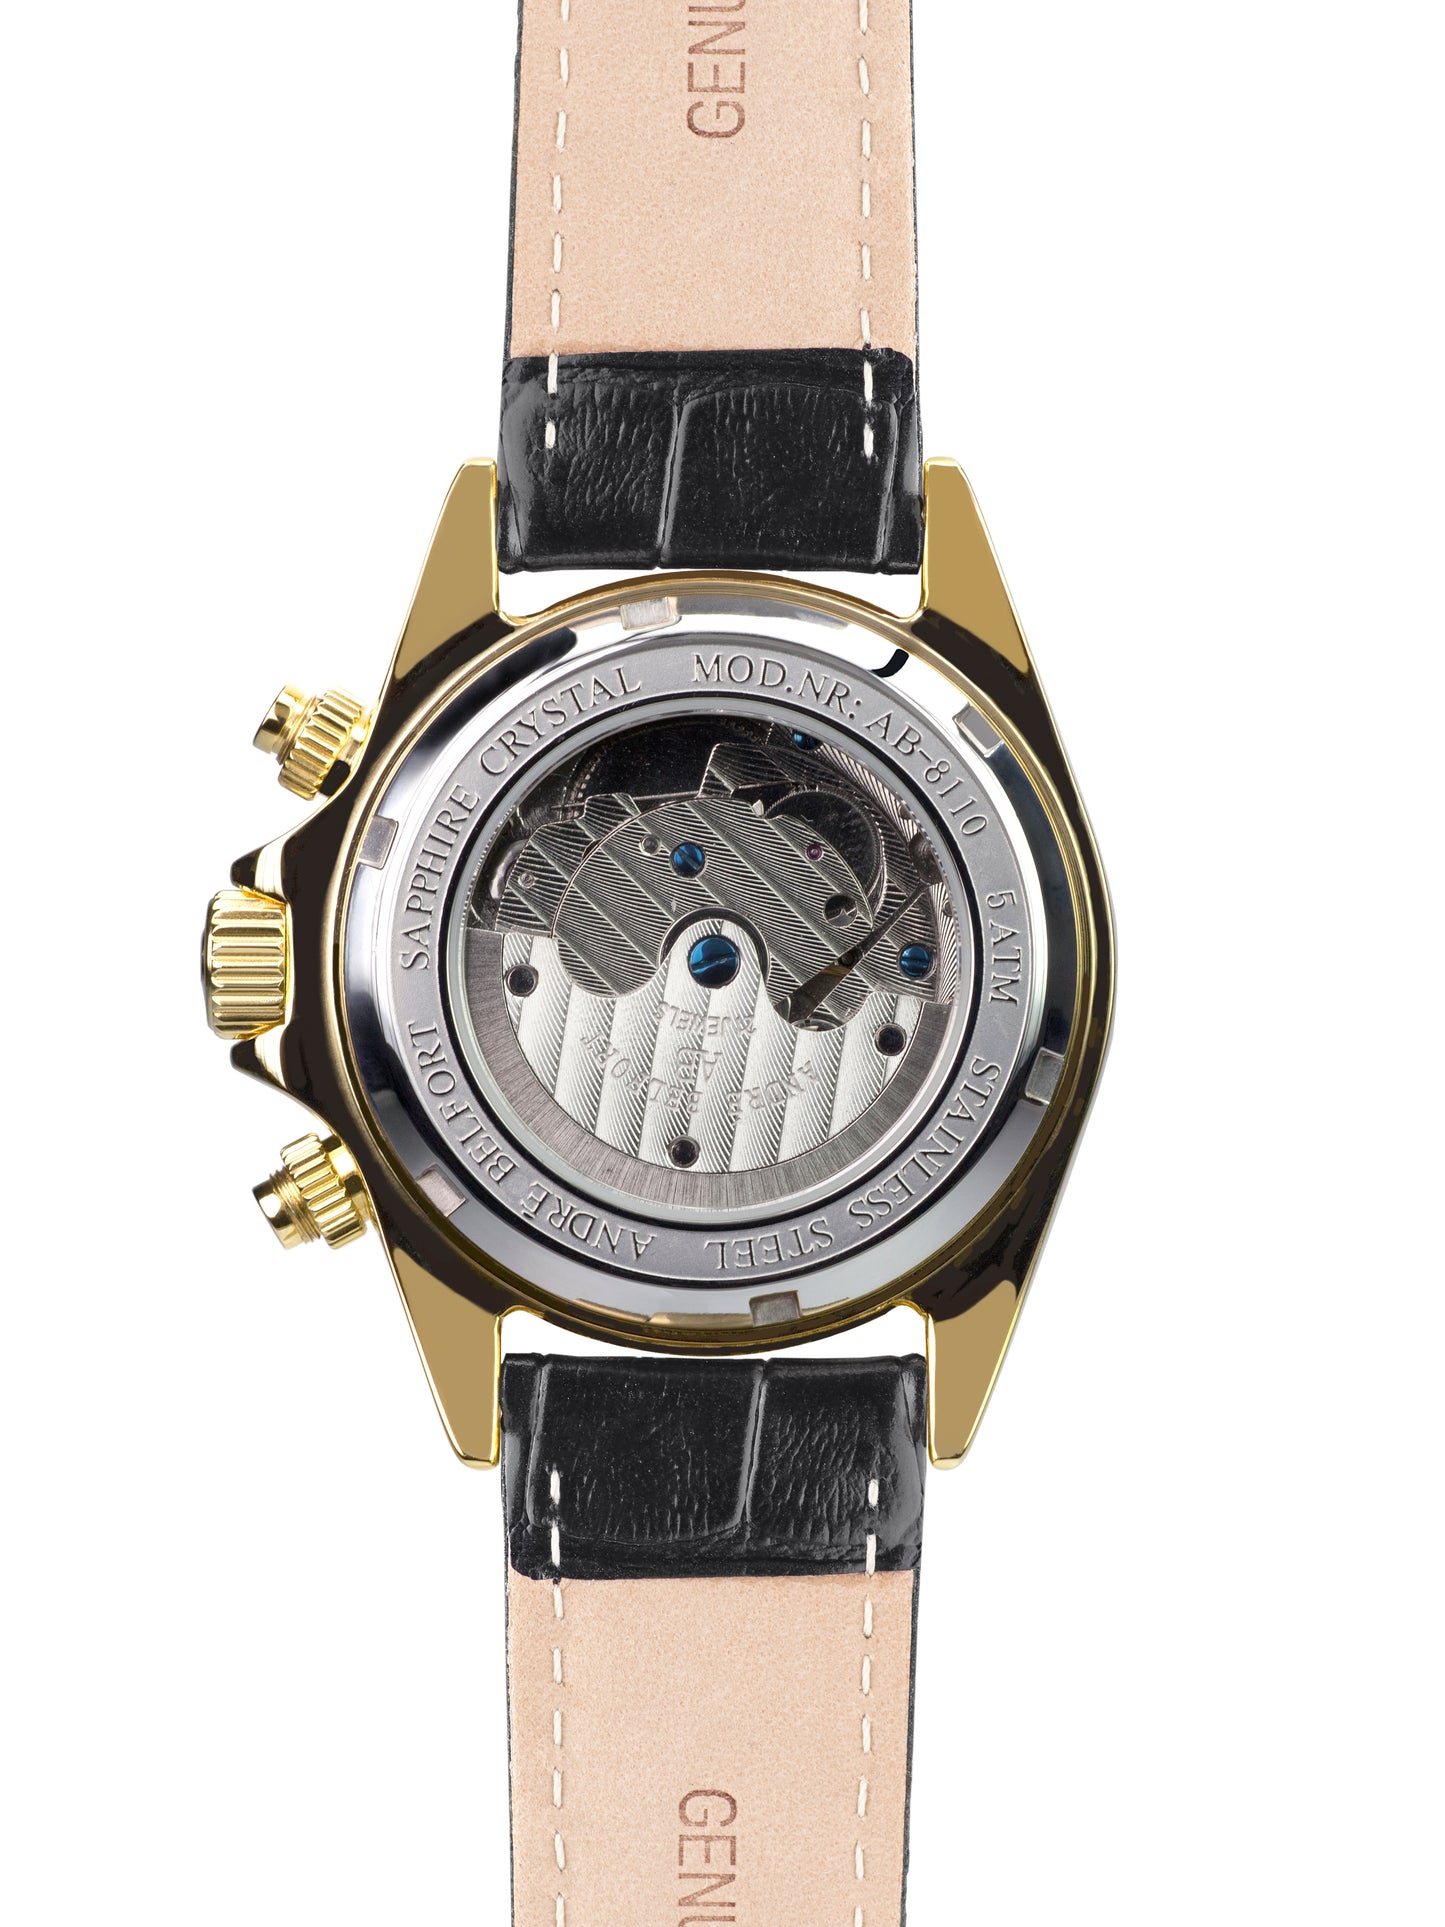 Automatic watches — Le Capitaine — André Belfort — gold onyx leather